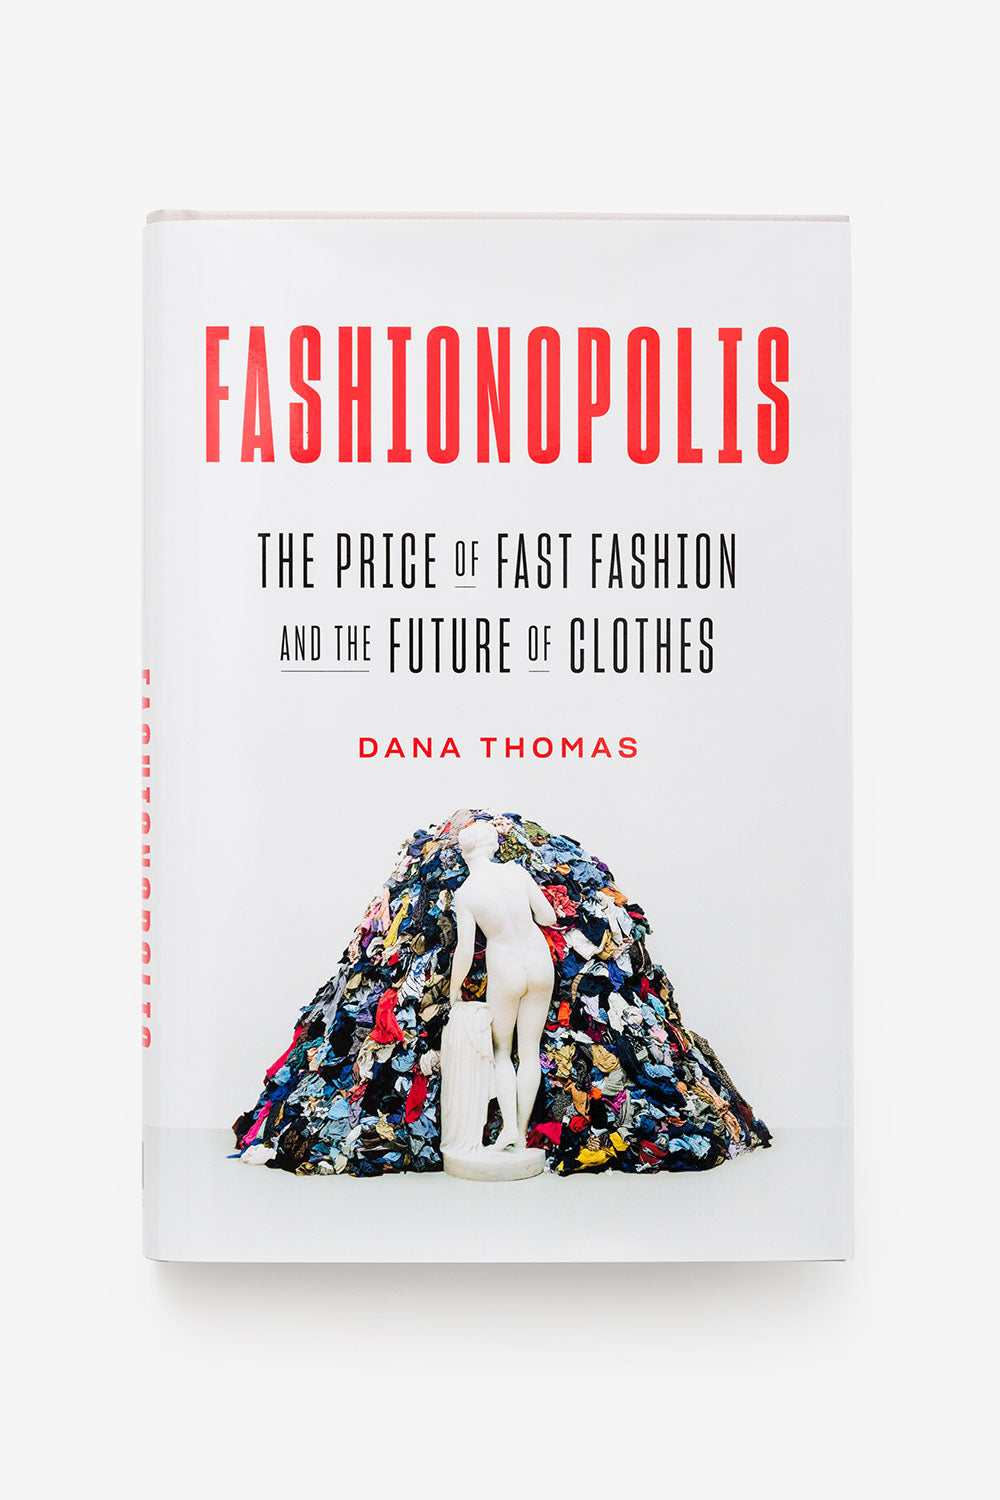 The School of Making Fashionopolis Book About the Price of Fast Fashion by Dana Thomas 